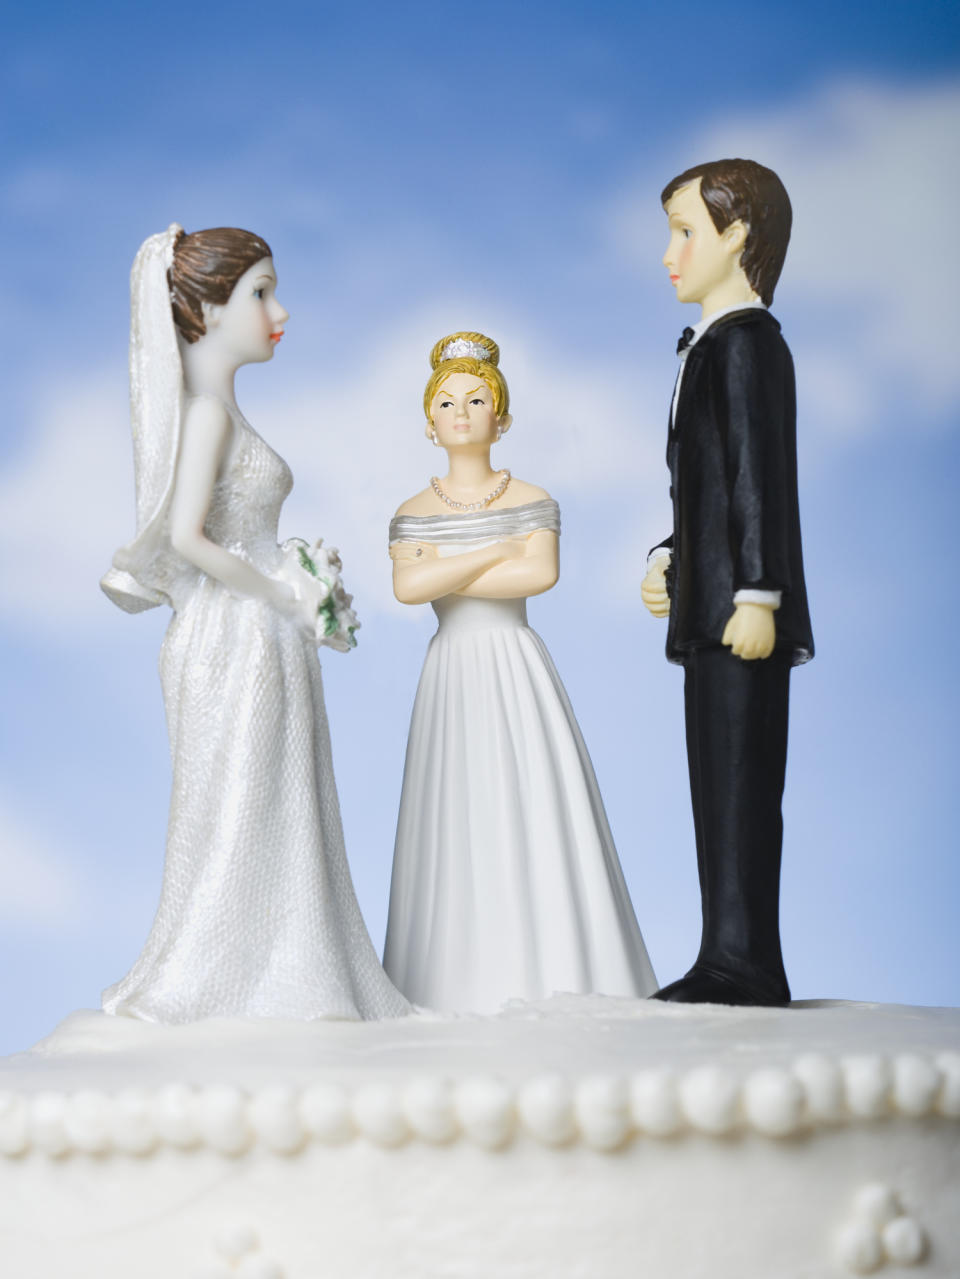 Wedding cake toppers depicting a bride and groom facing each other with an angry woman in a white dress and tiara standing between them, her arms crossed